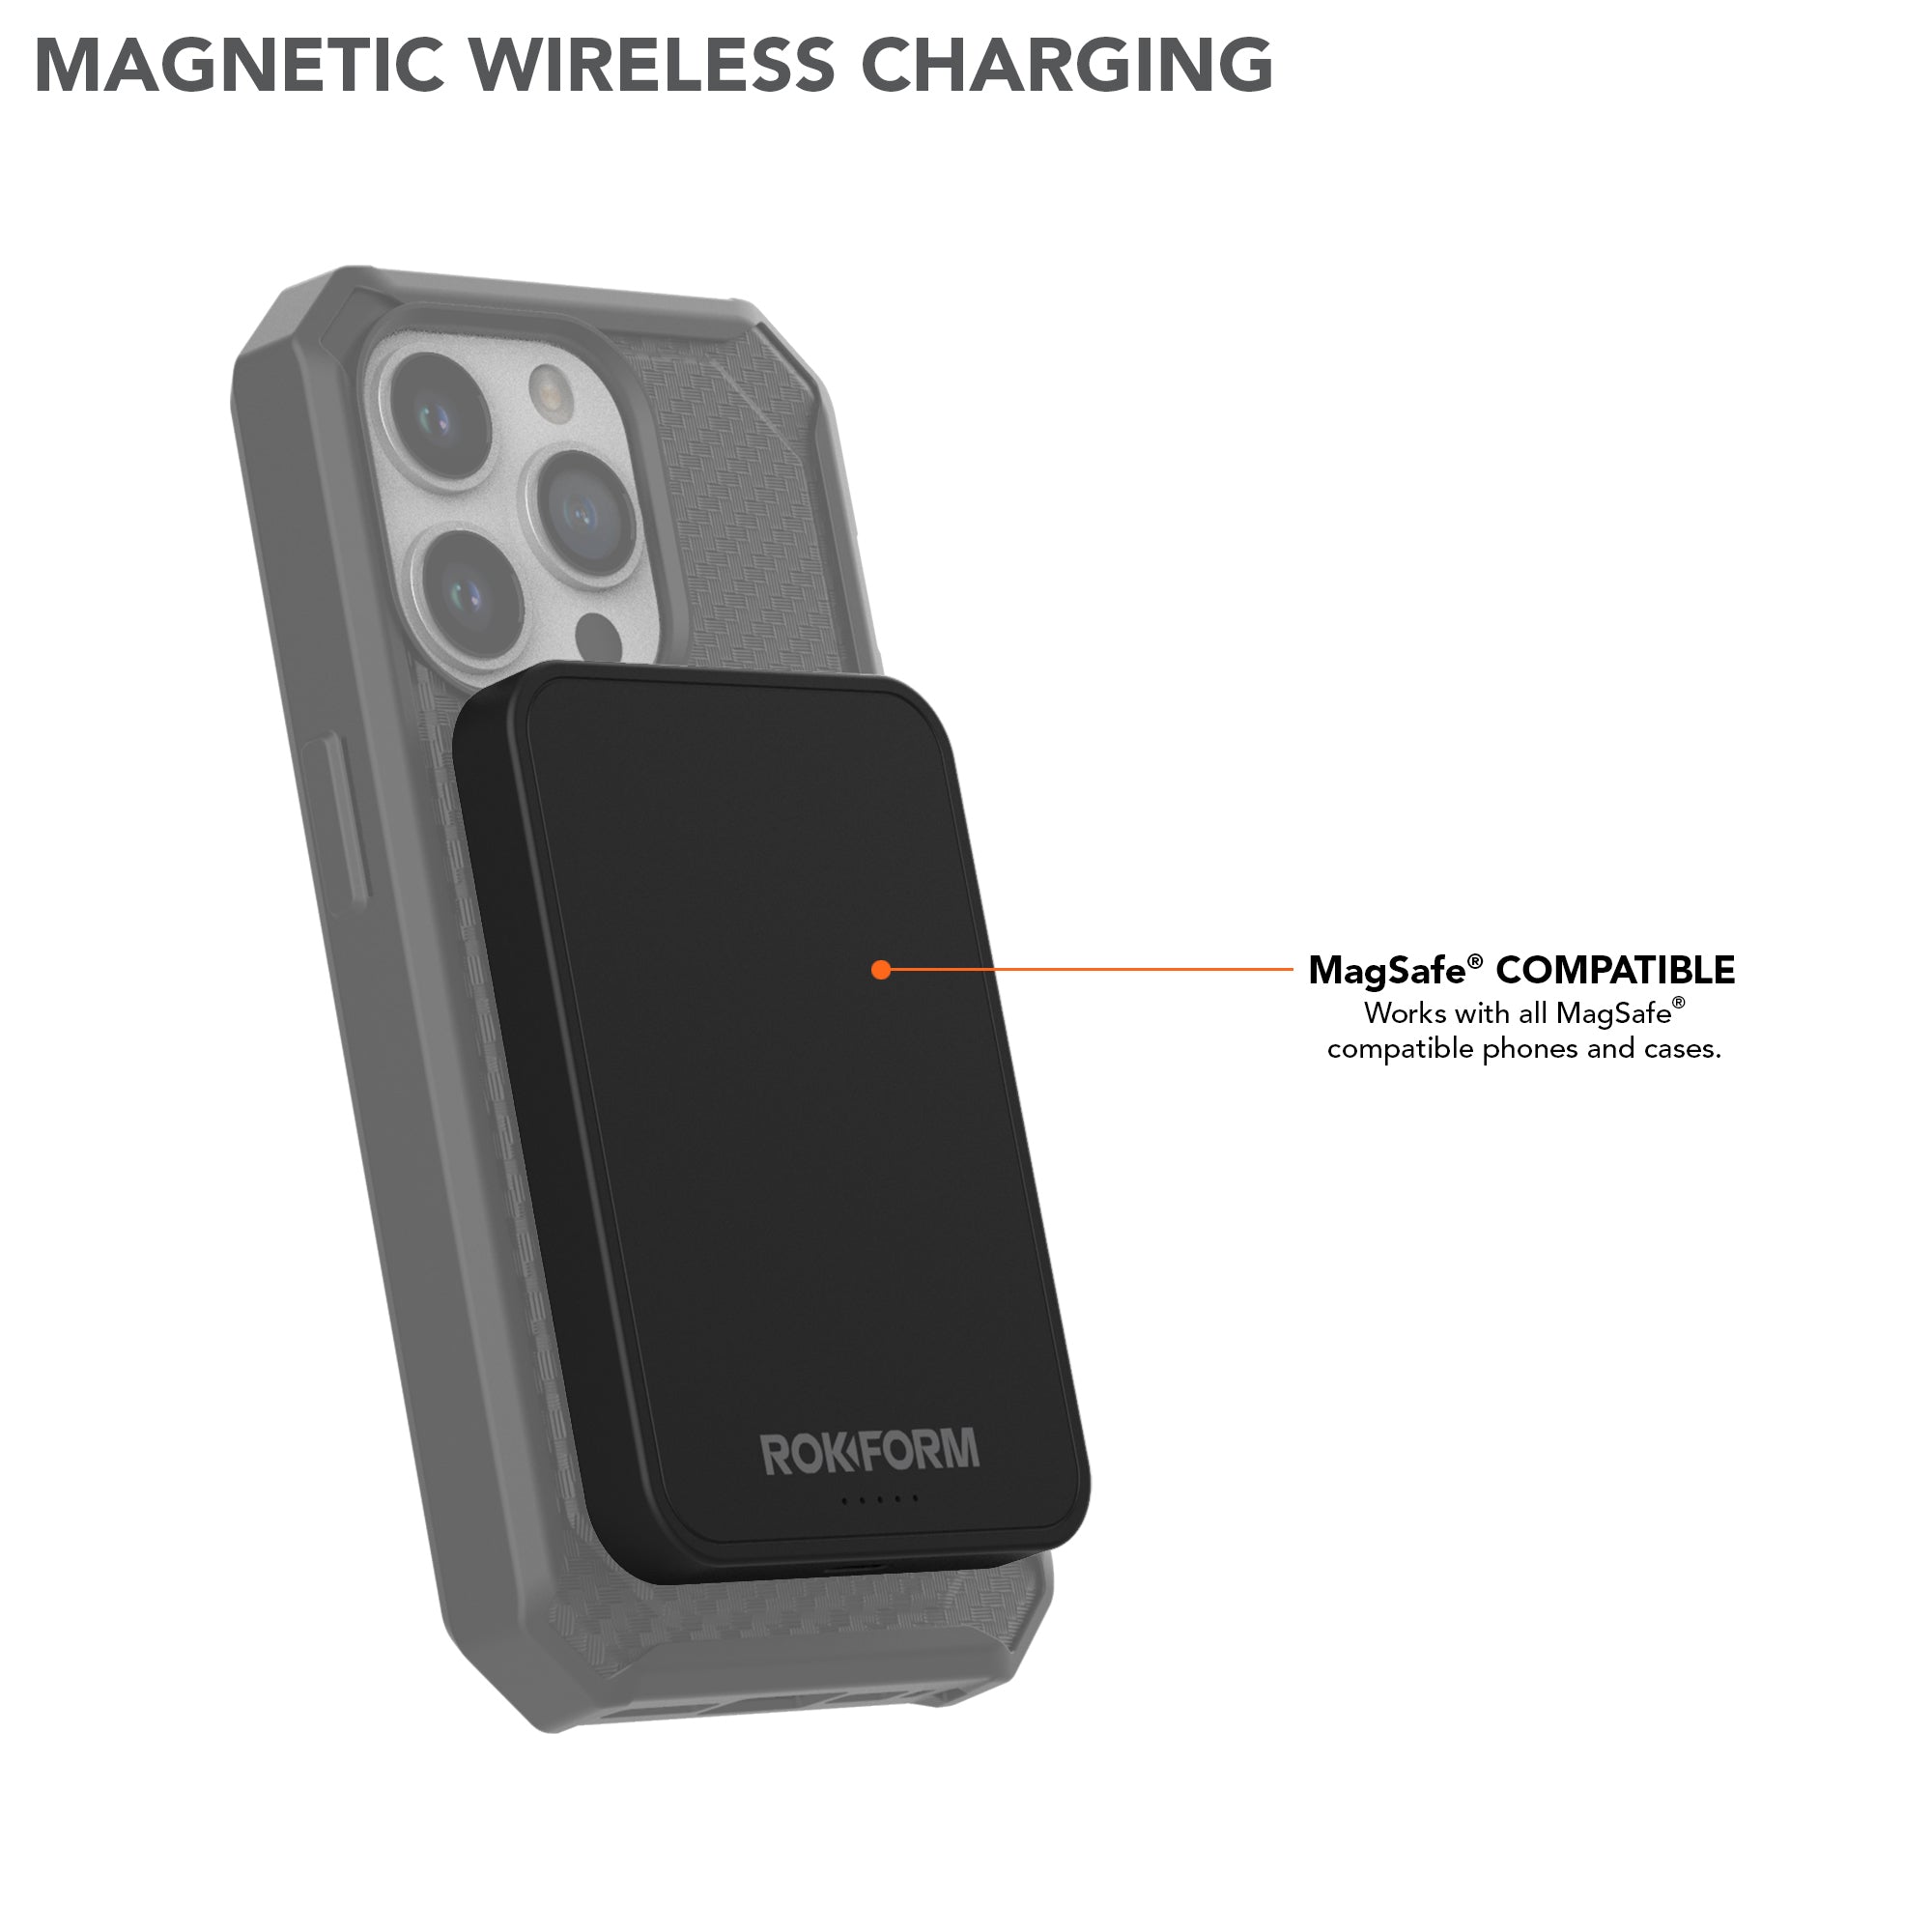 Magnetic Wireless Power Bank Charging